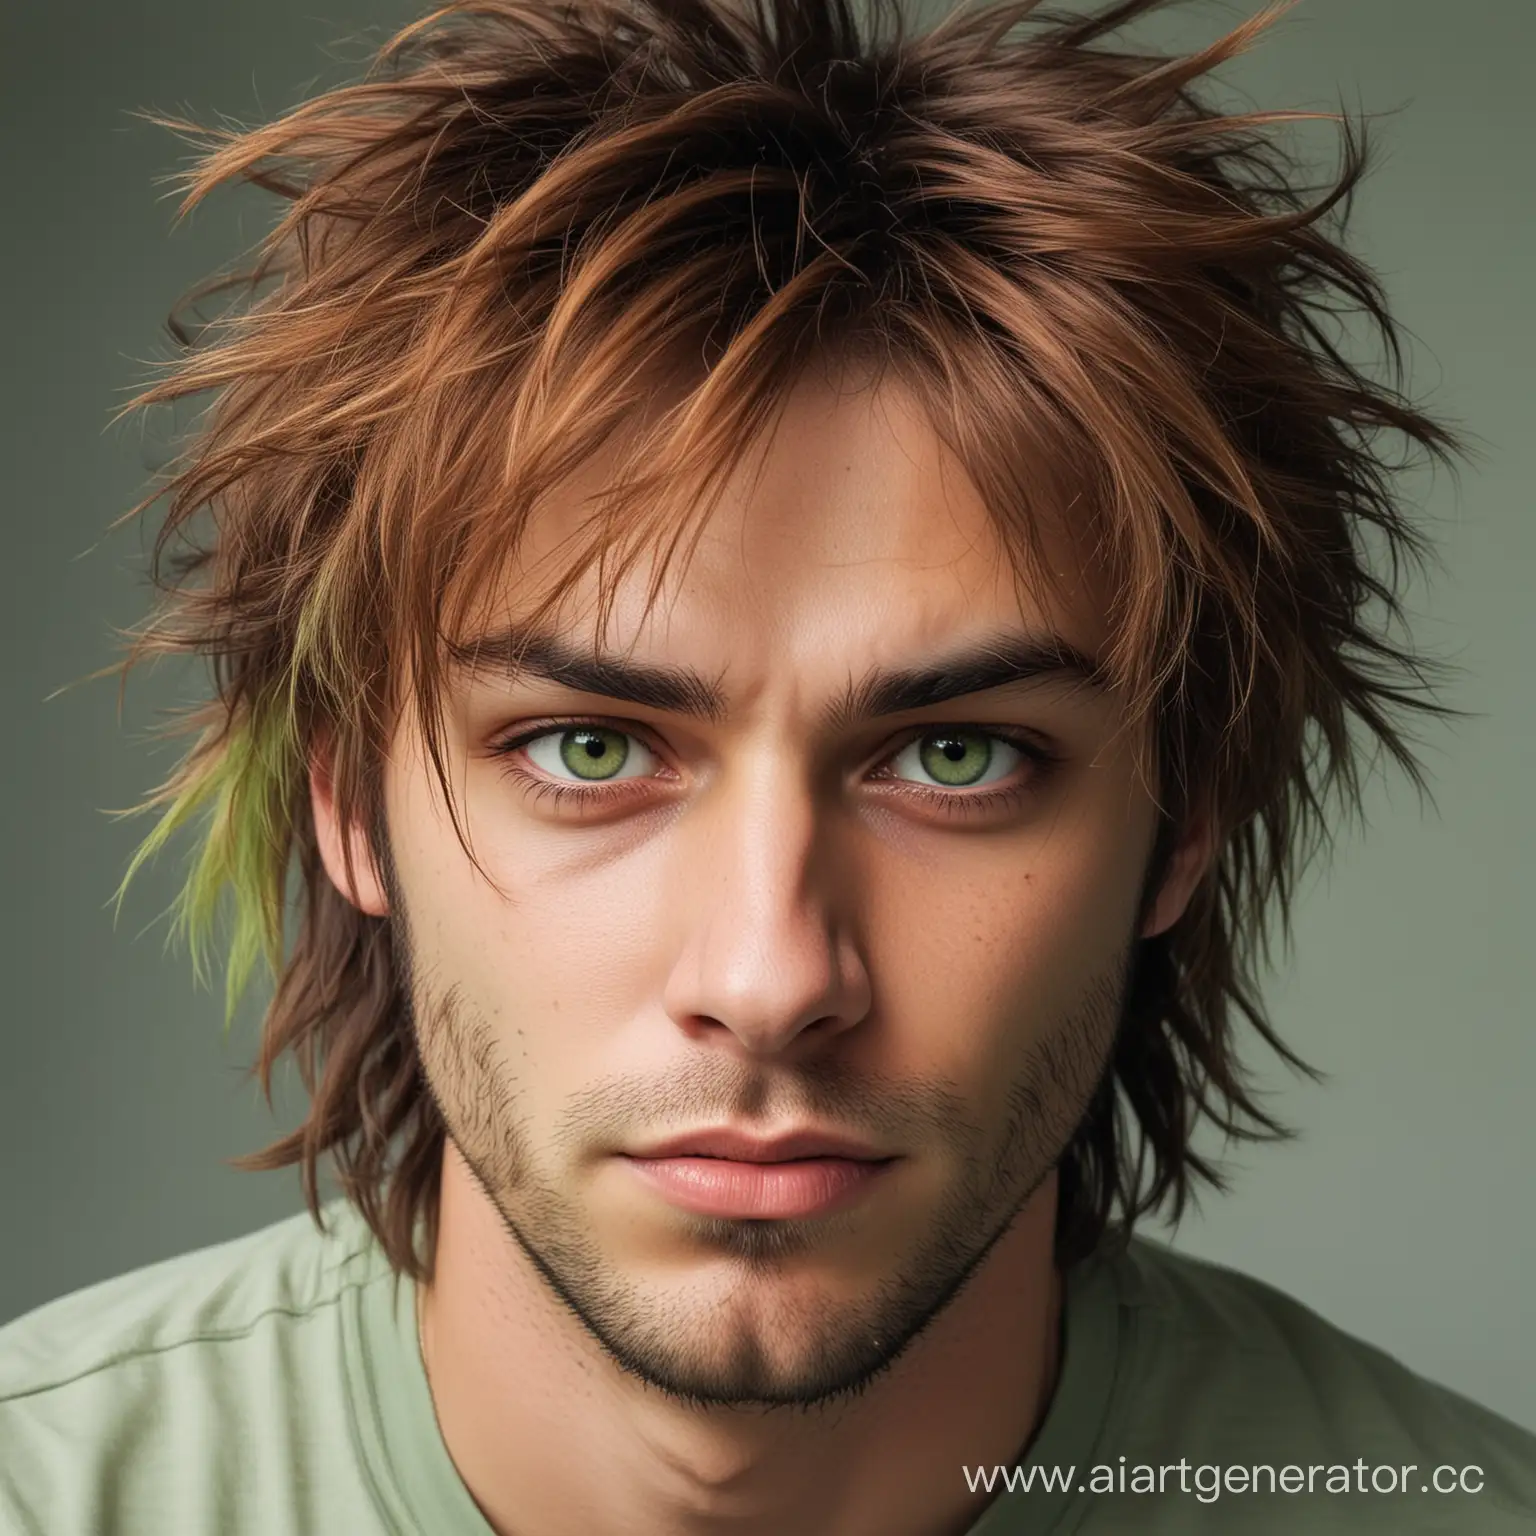 Brooding-Man-with-Russet-Hair-and-Catlike-Eyes